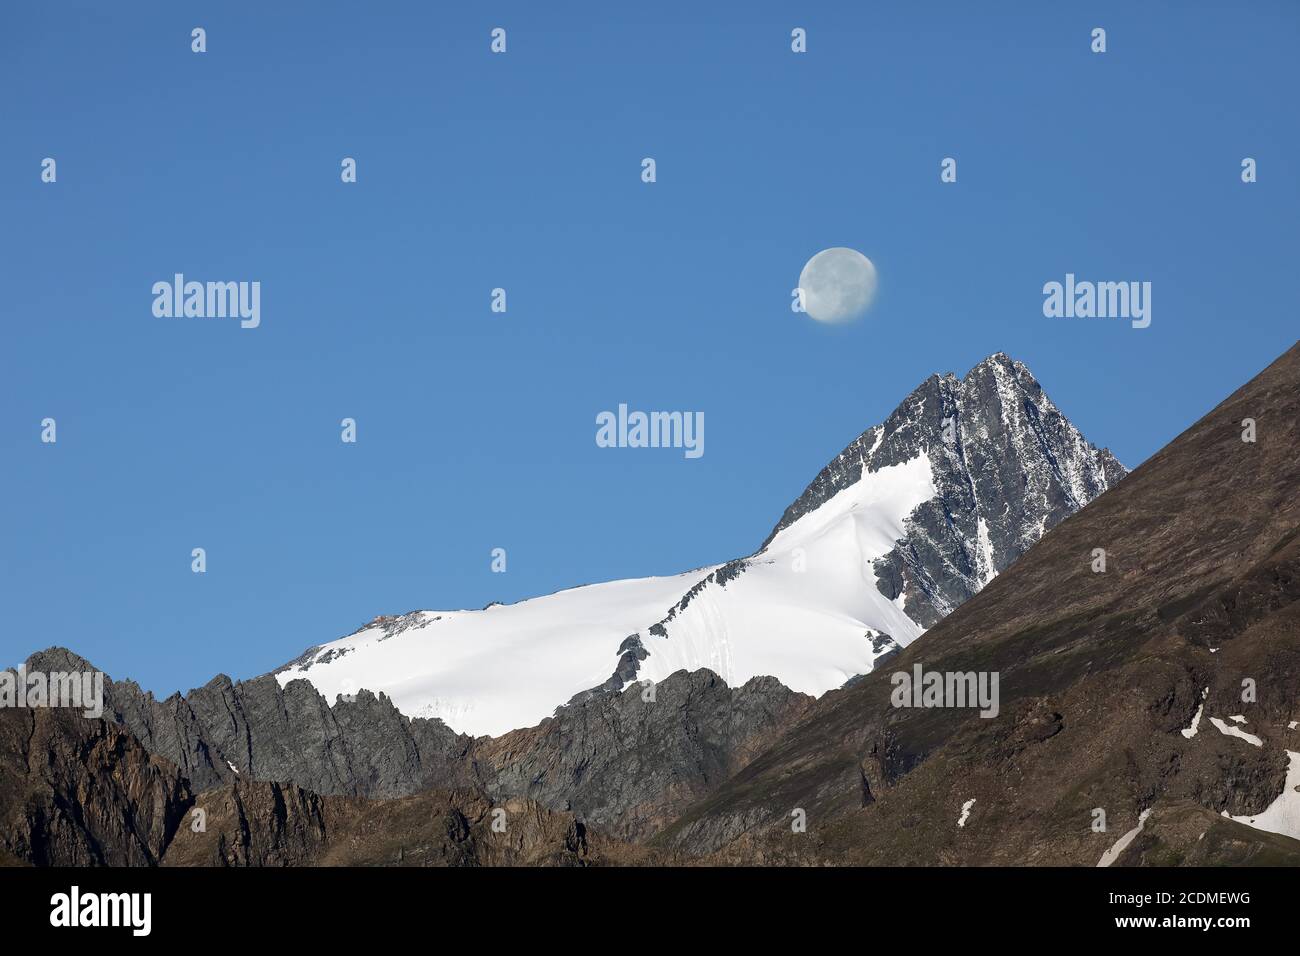 Grossglockner with setting moon, view from the Grossglockner High Alpine Road, Salzburg, Austria Stock Photo